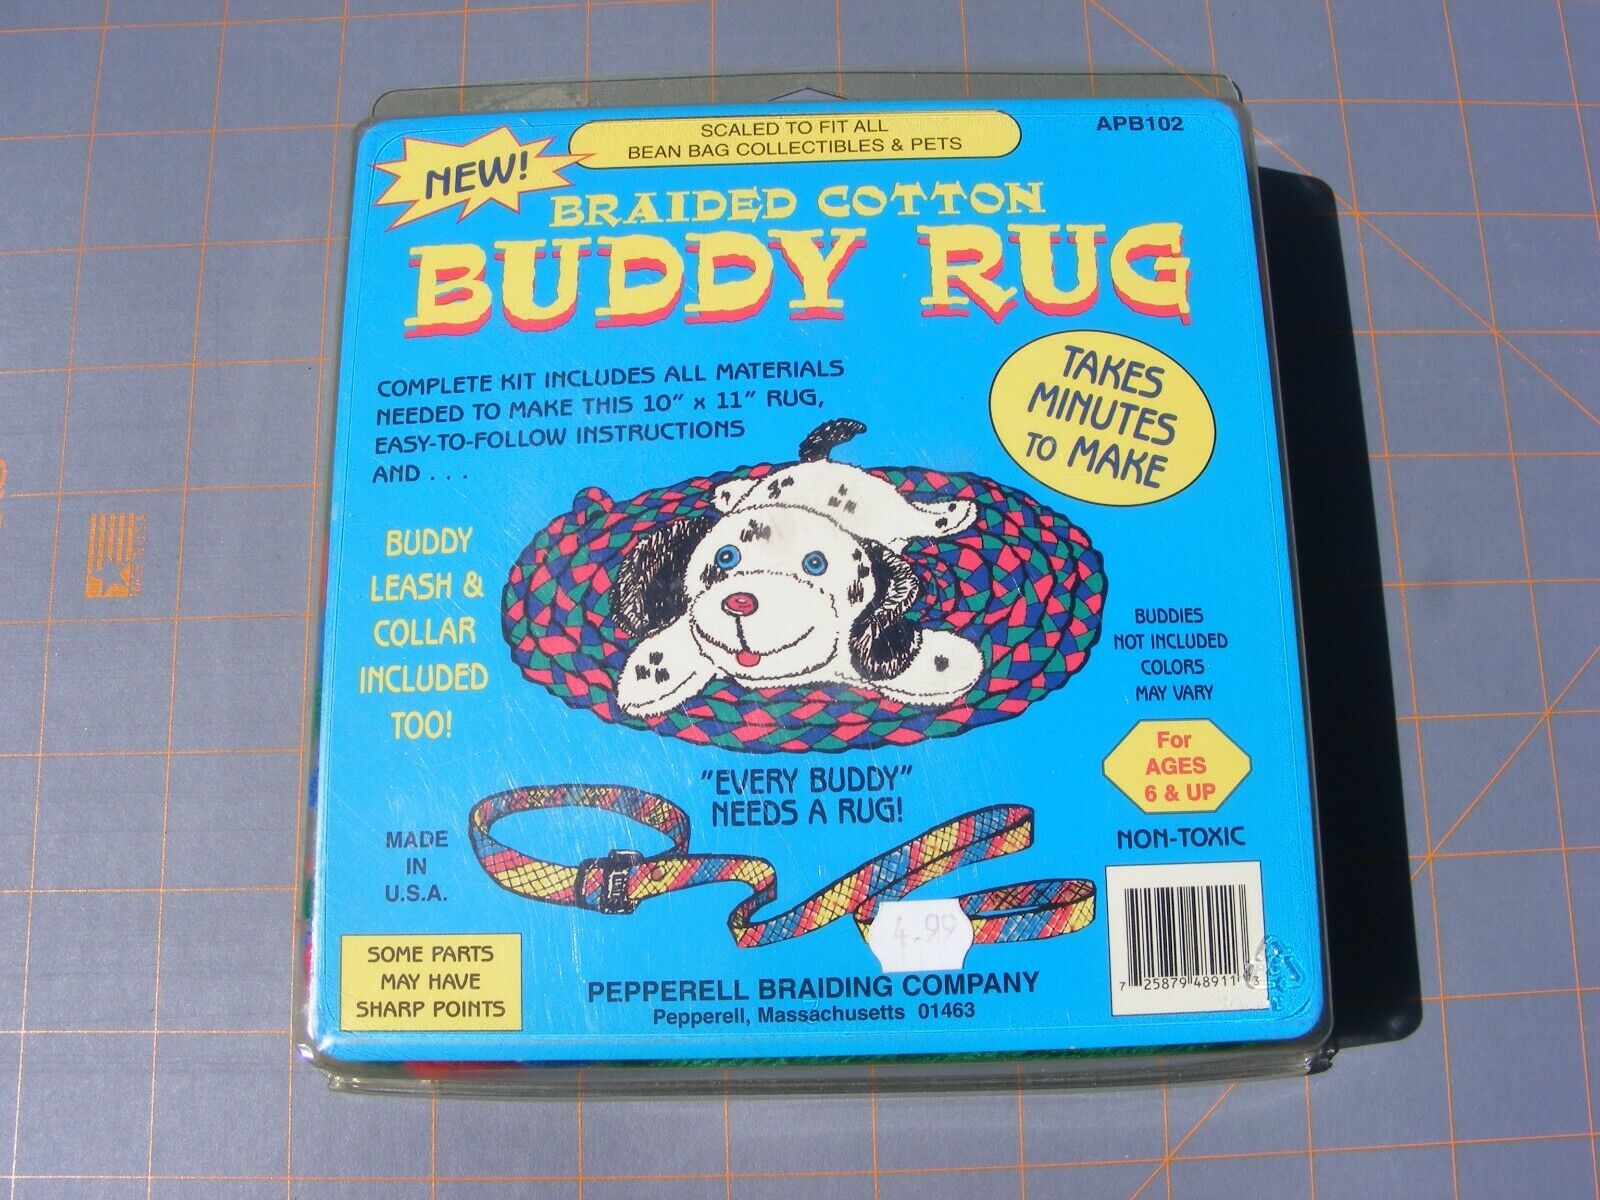 Vintage Braided Cotton Buddy Rug Kit By Pepperell For Stuffed Animals 10"x11"